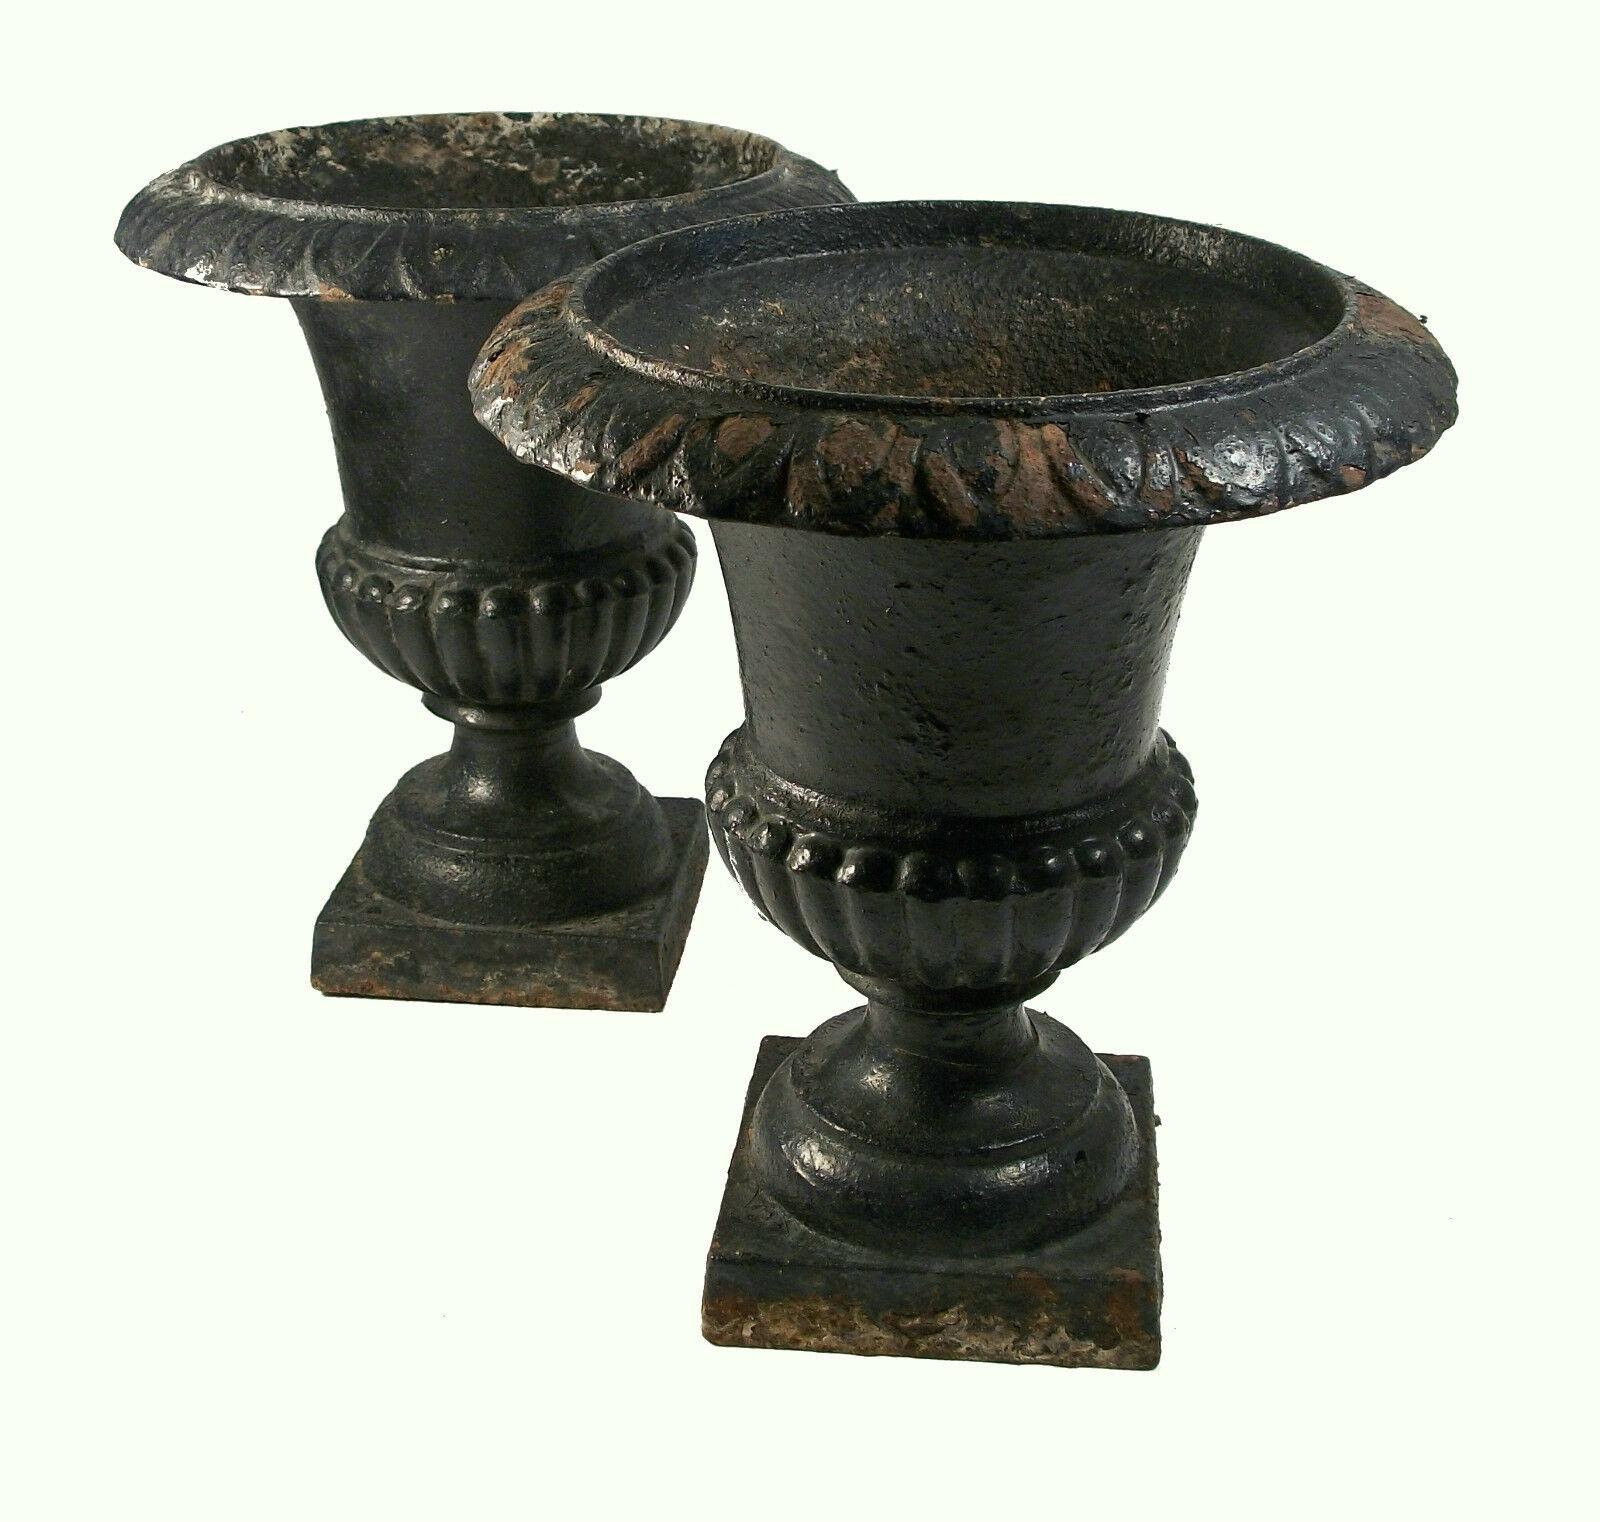 Antique pair of small scale Campagna form cast iron garden urns - unsigned - United States - late 19th/early 20th century.

Excellent antique condition - no loss - no damage - no repairs - paint loss/surface grime & rust that comes with age and